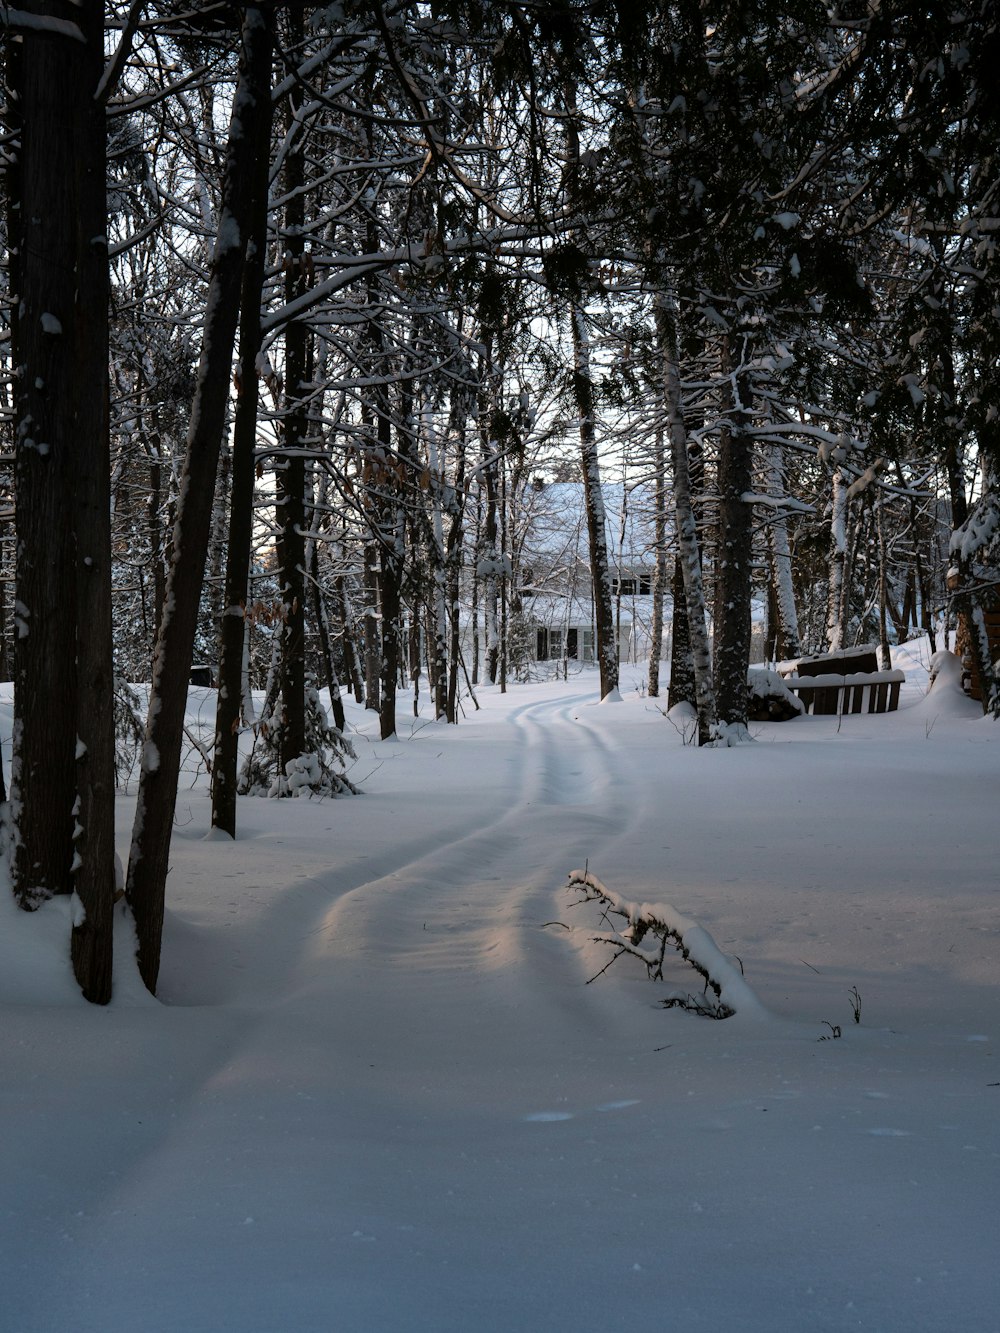 a path through a snowy forest with a bench in the distance